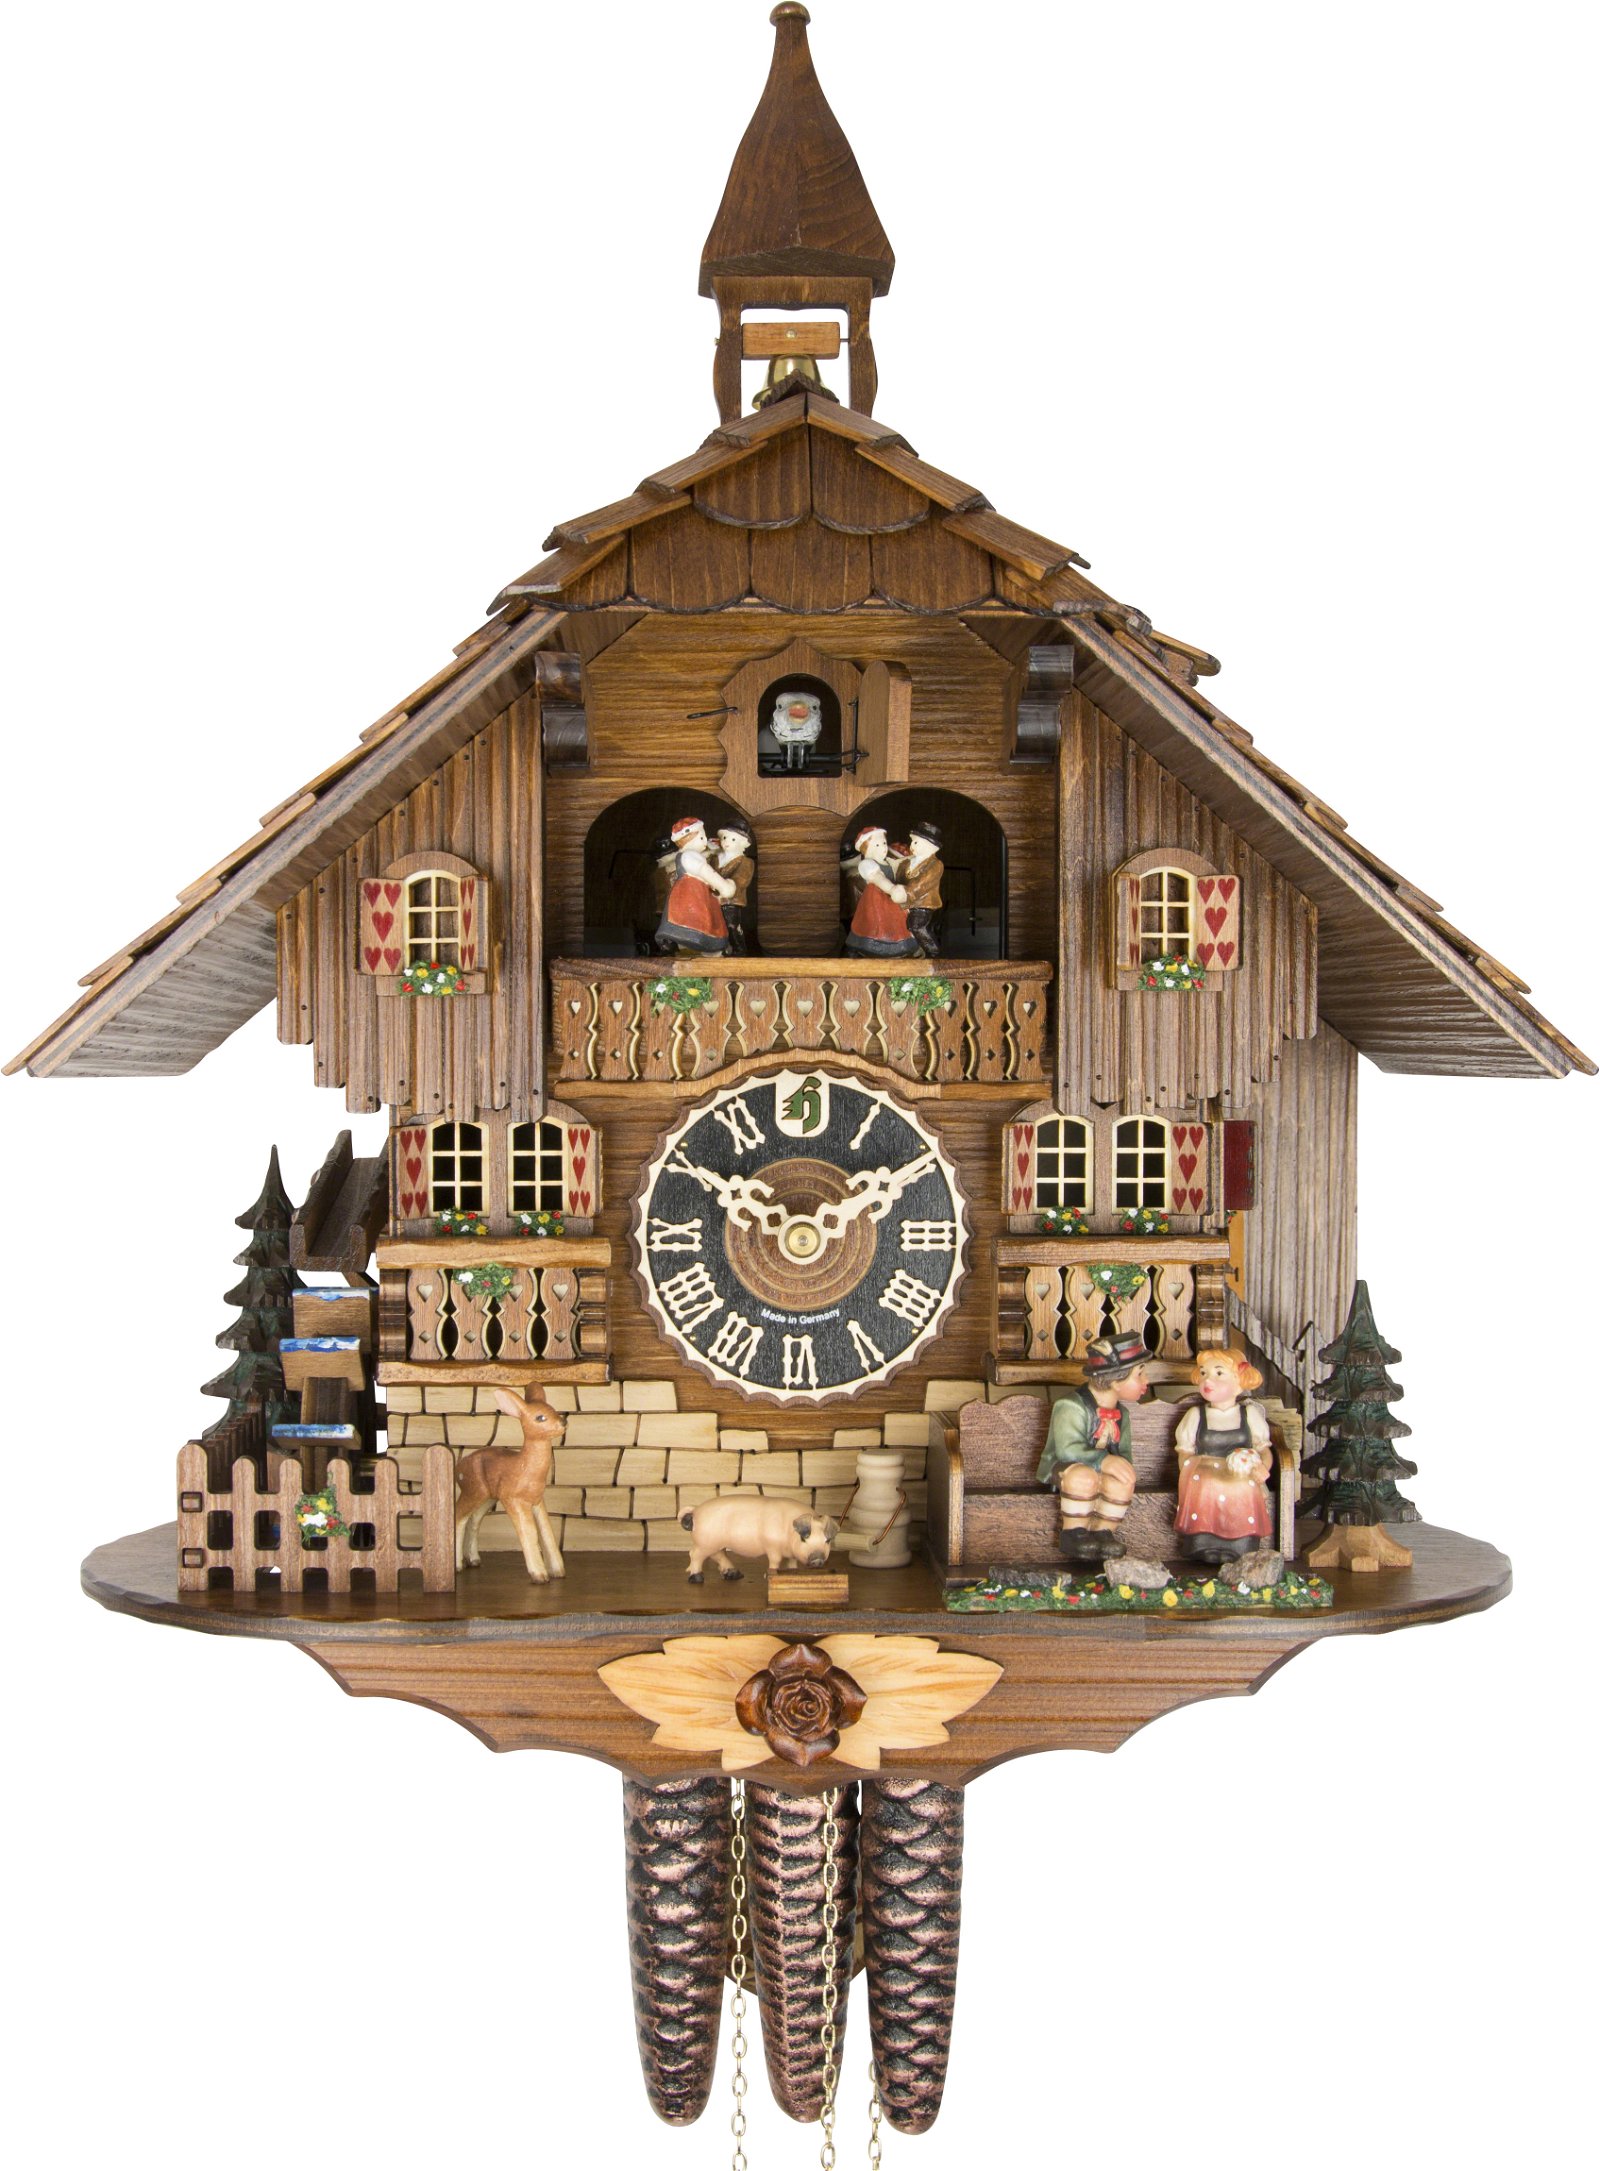 Cuckoo Clock 1-day-movement Chalet-Style 16.5" by Hekas